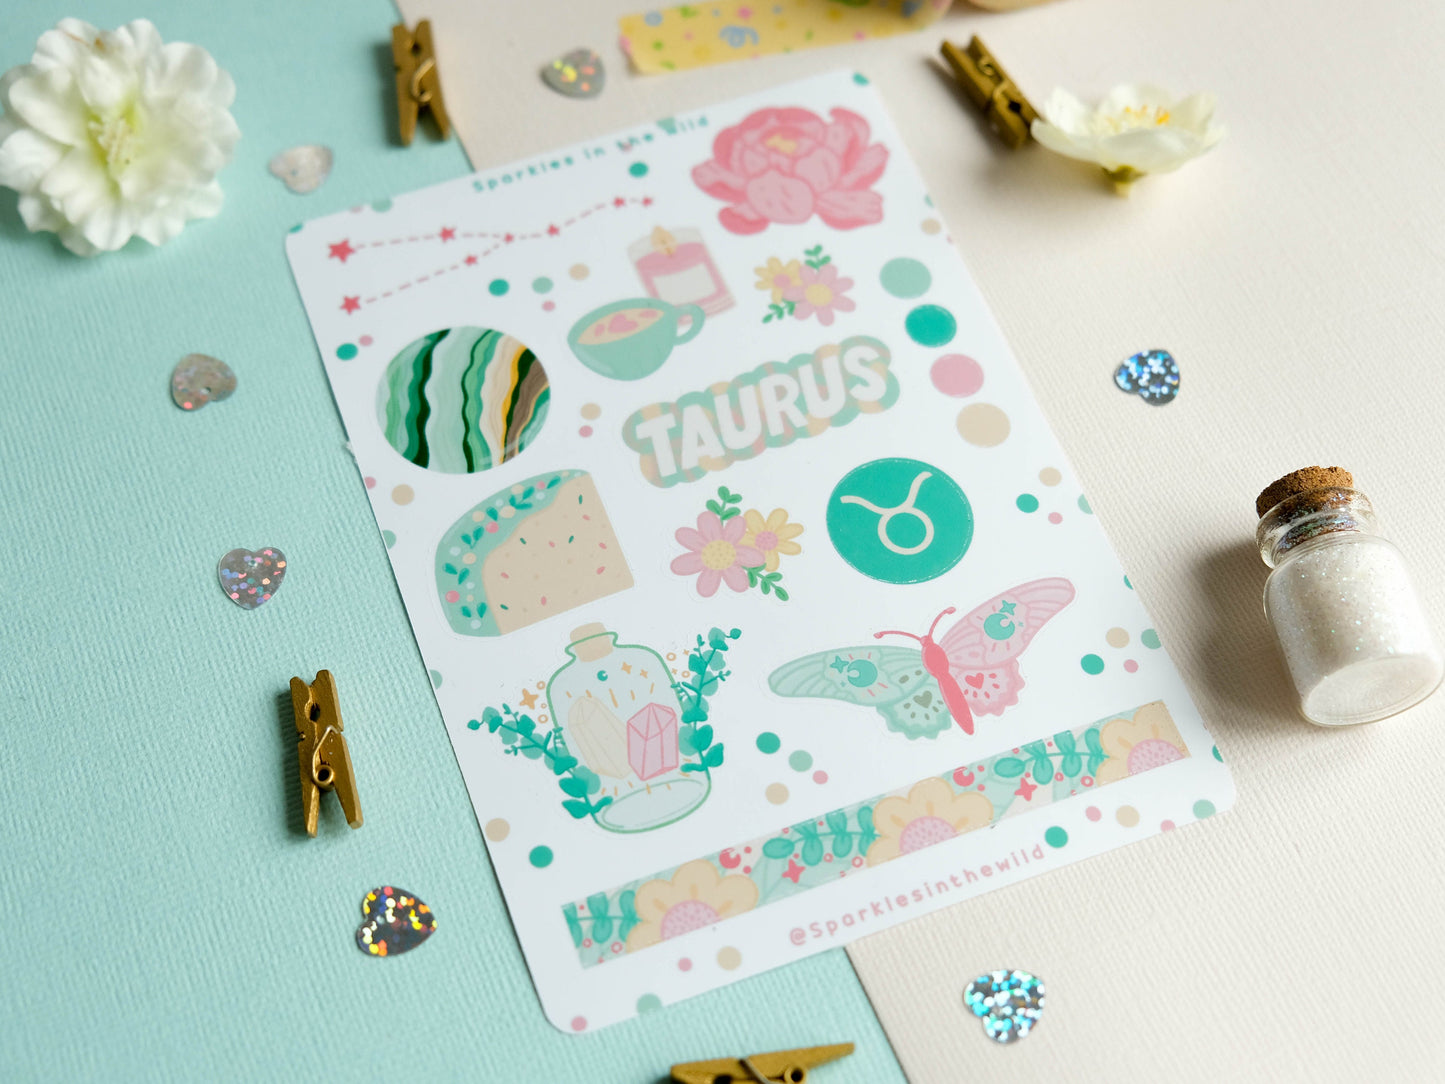 Sticker sheet Taurus astrology enthusiasts - Add a personal touch to your favorite items with this unique collection of Taurus stickers